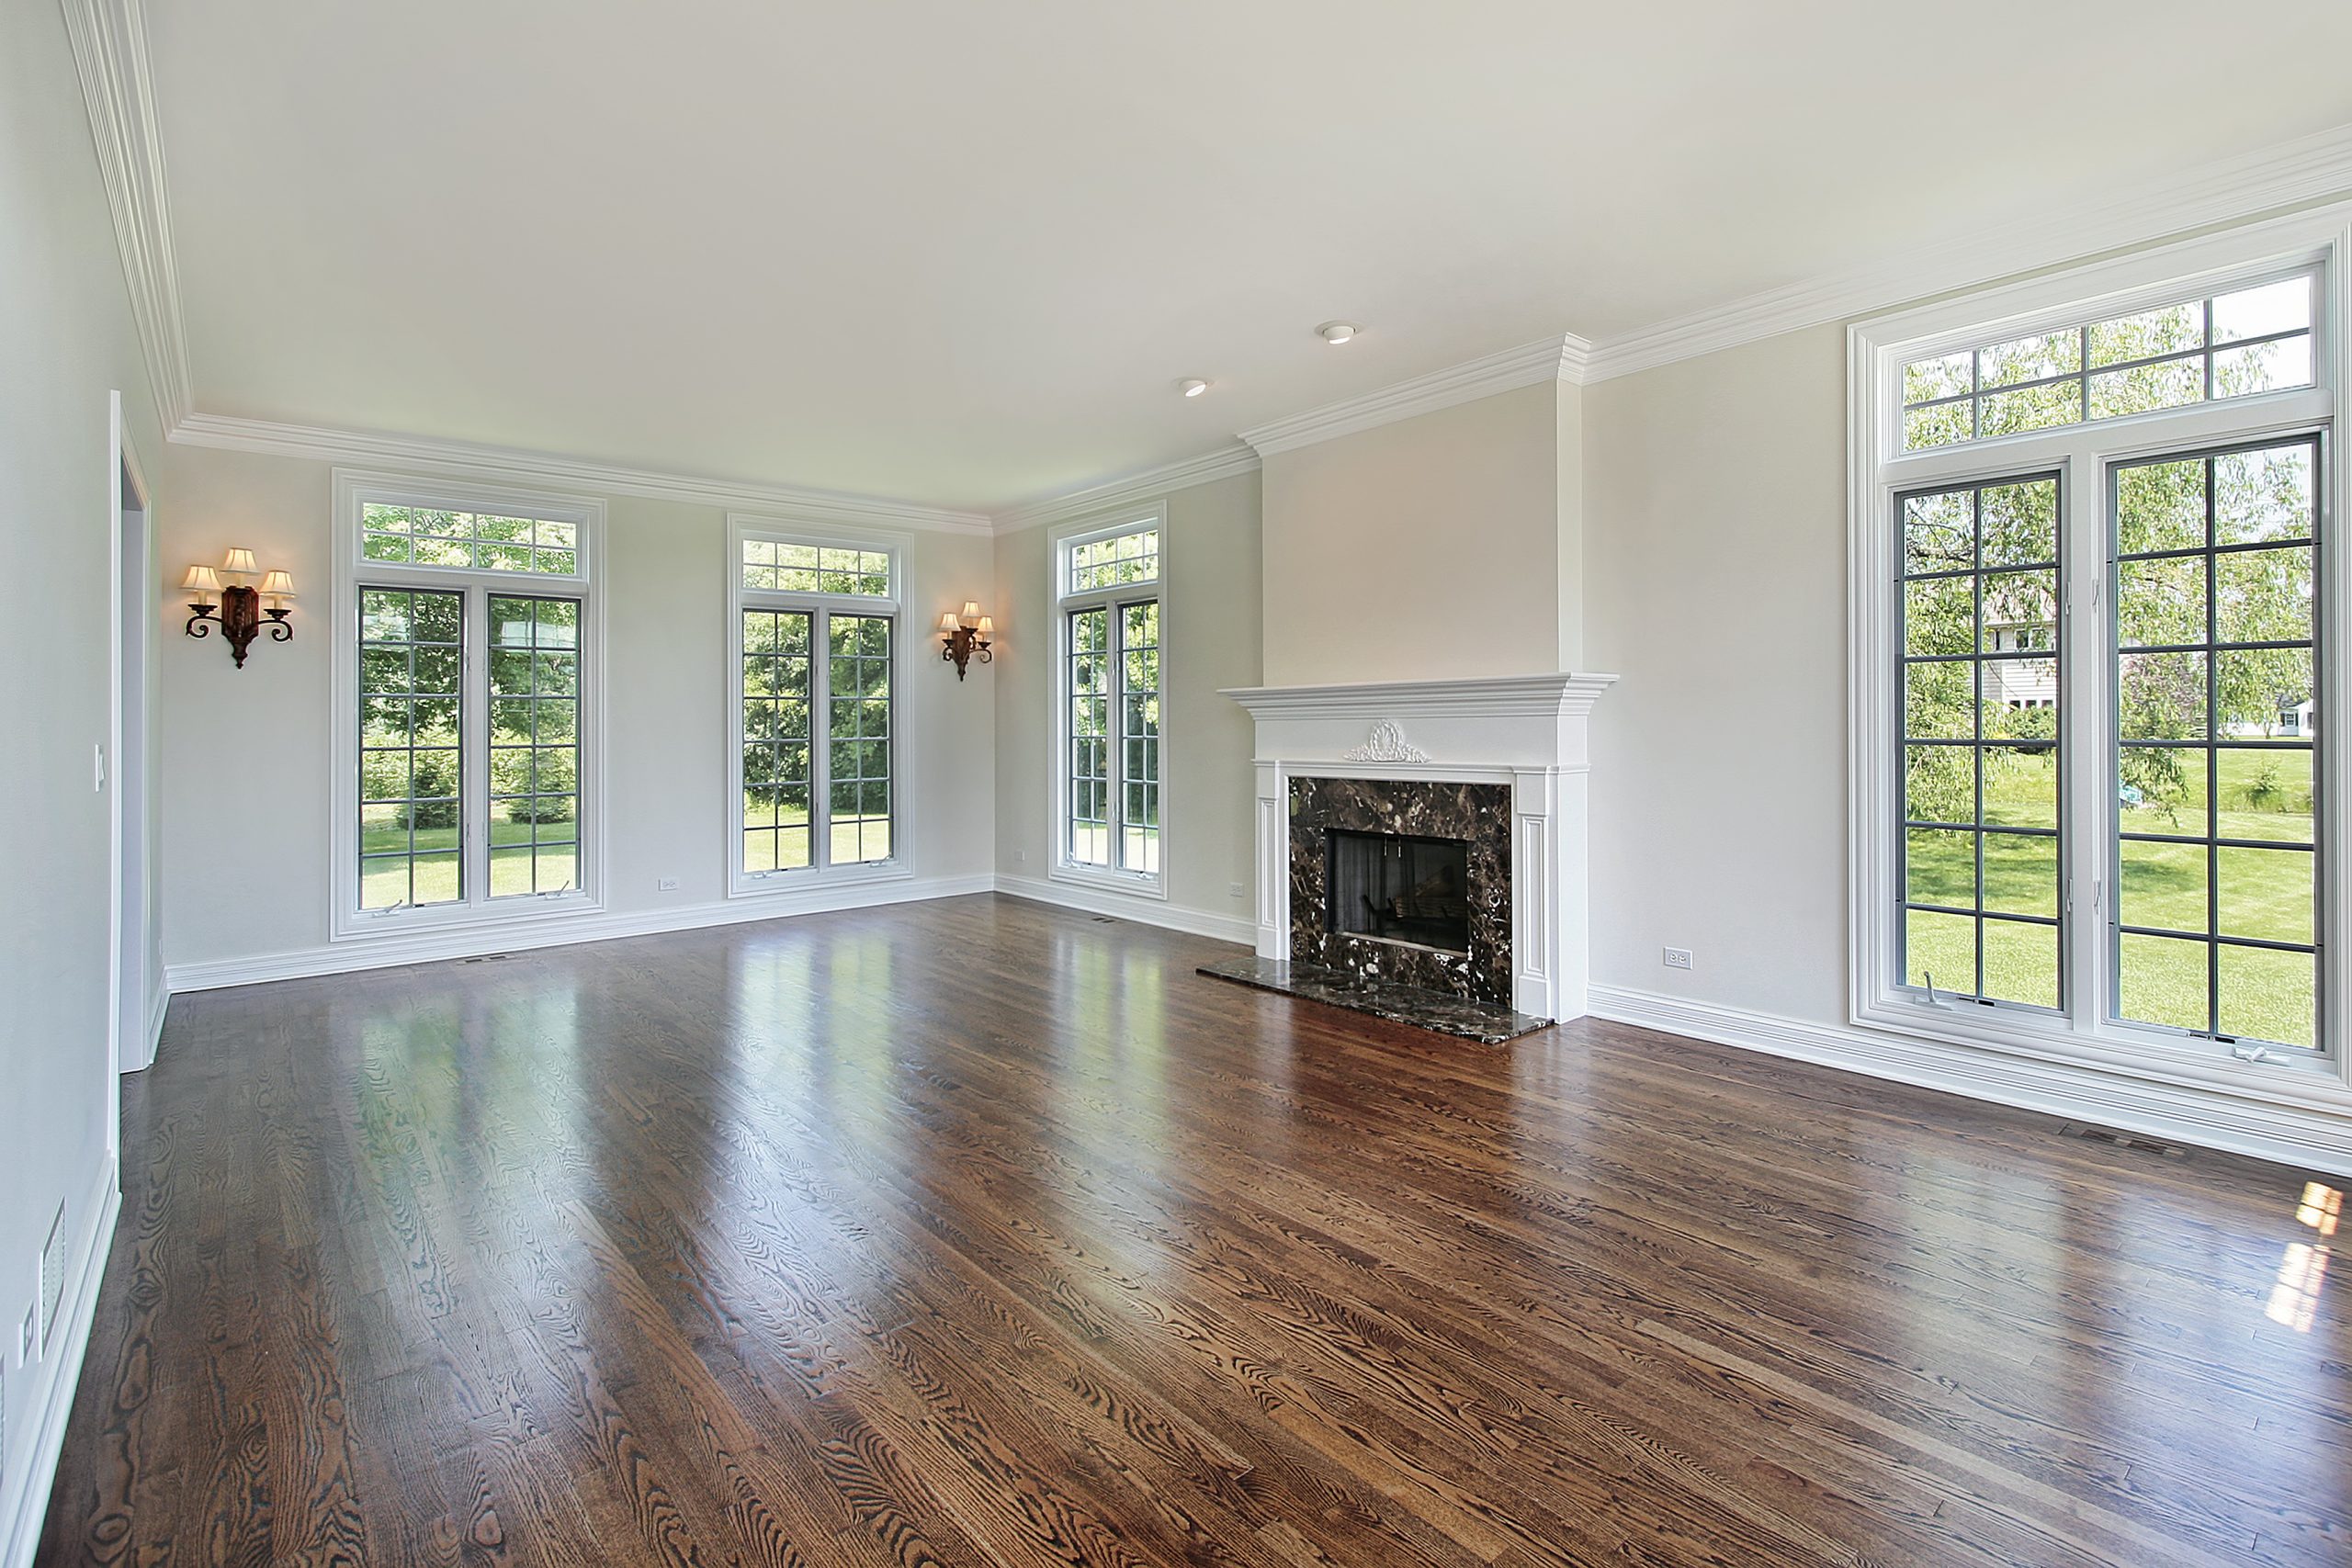 Diffe Types Of Polyurethane Finishes, What Gloss Level For Hardwood Floors